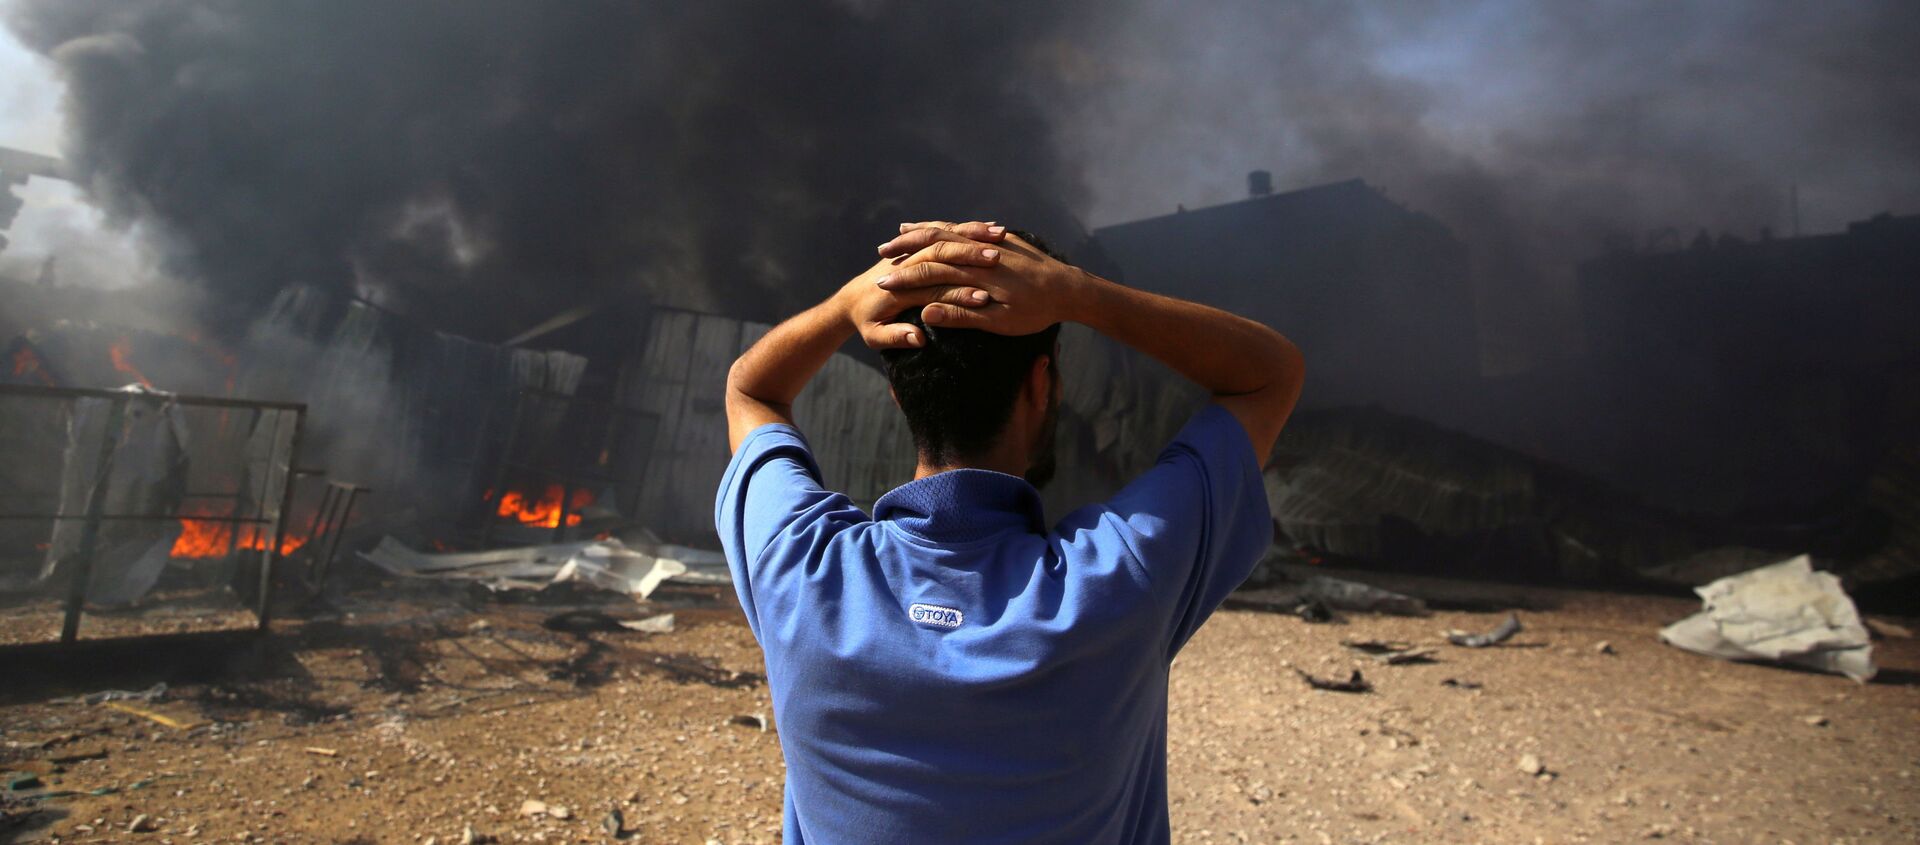 A man stands near a burning sponge factory after it was hit by Israeli artillery shells, according to witnesses, in the northern Gaza Strip May 17, 2021 - Sputnik International, 1920, 18.05.2021